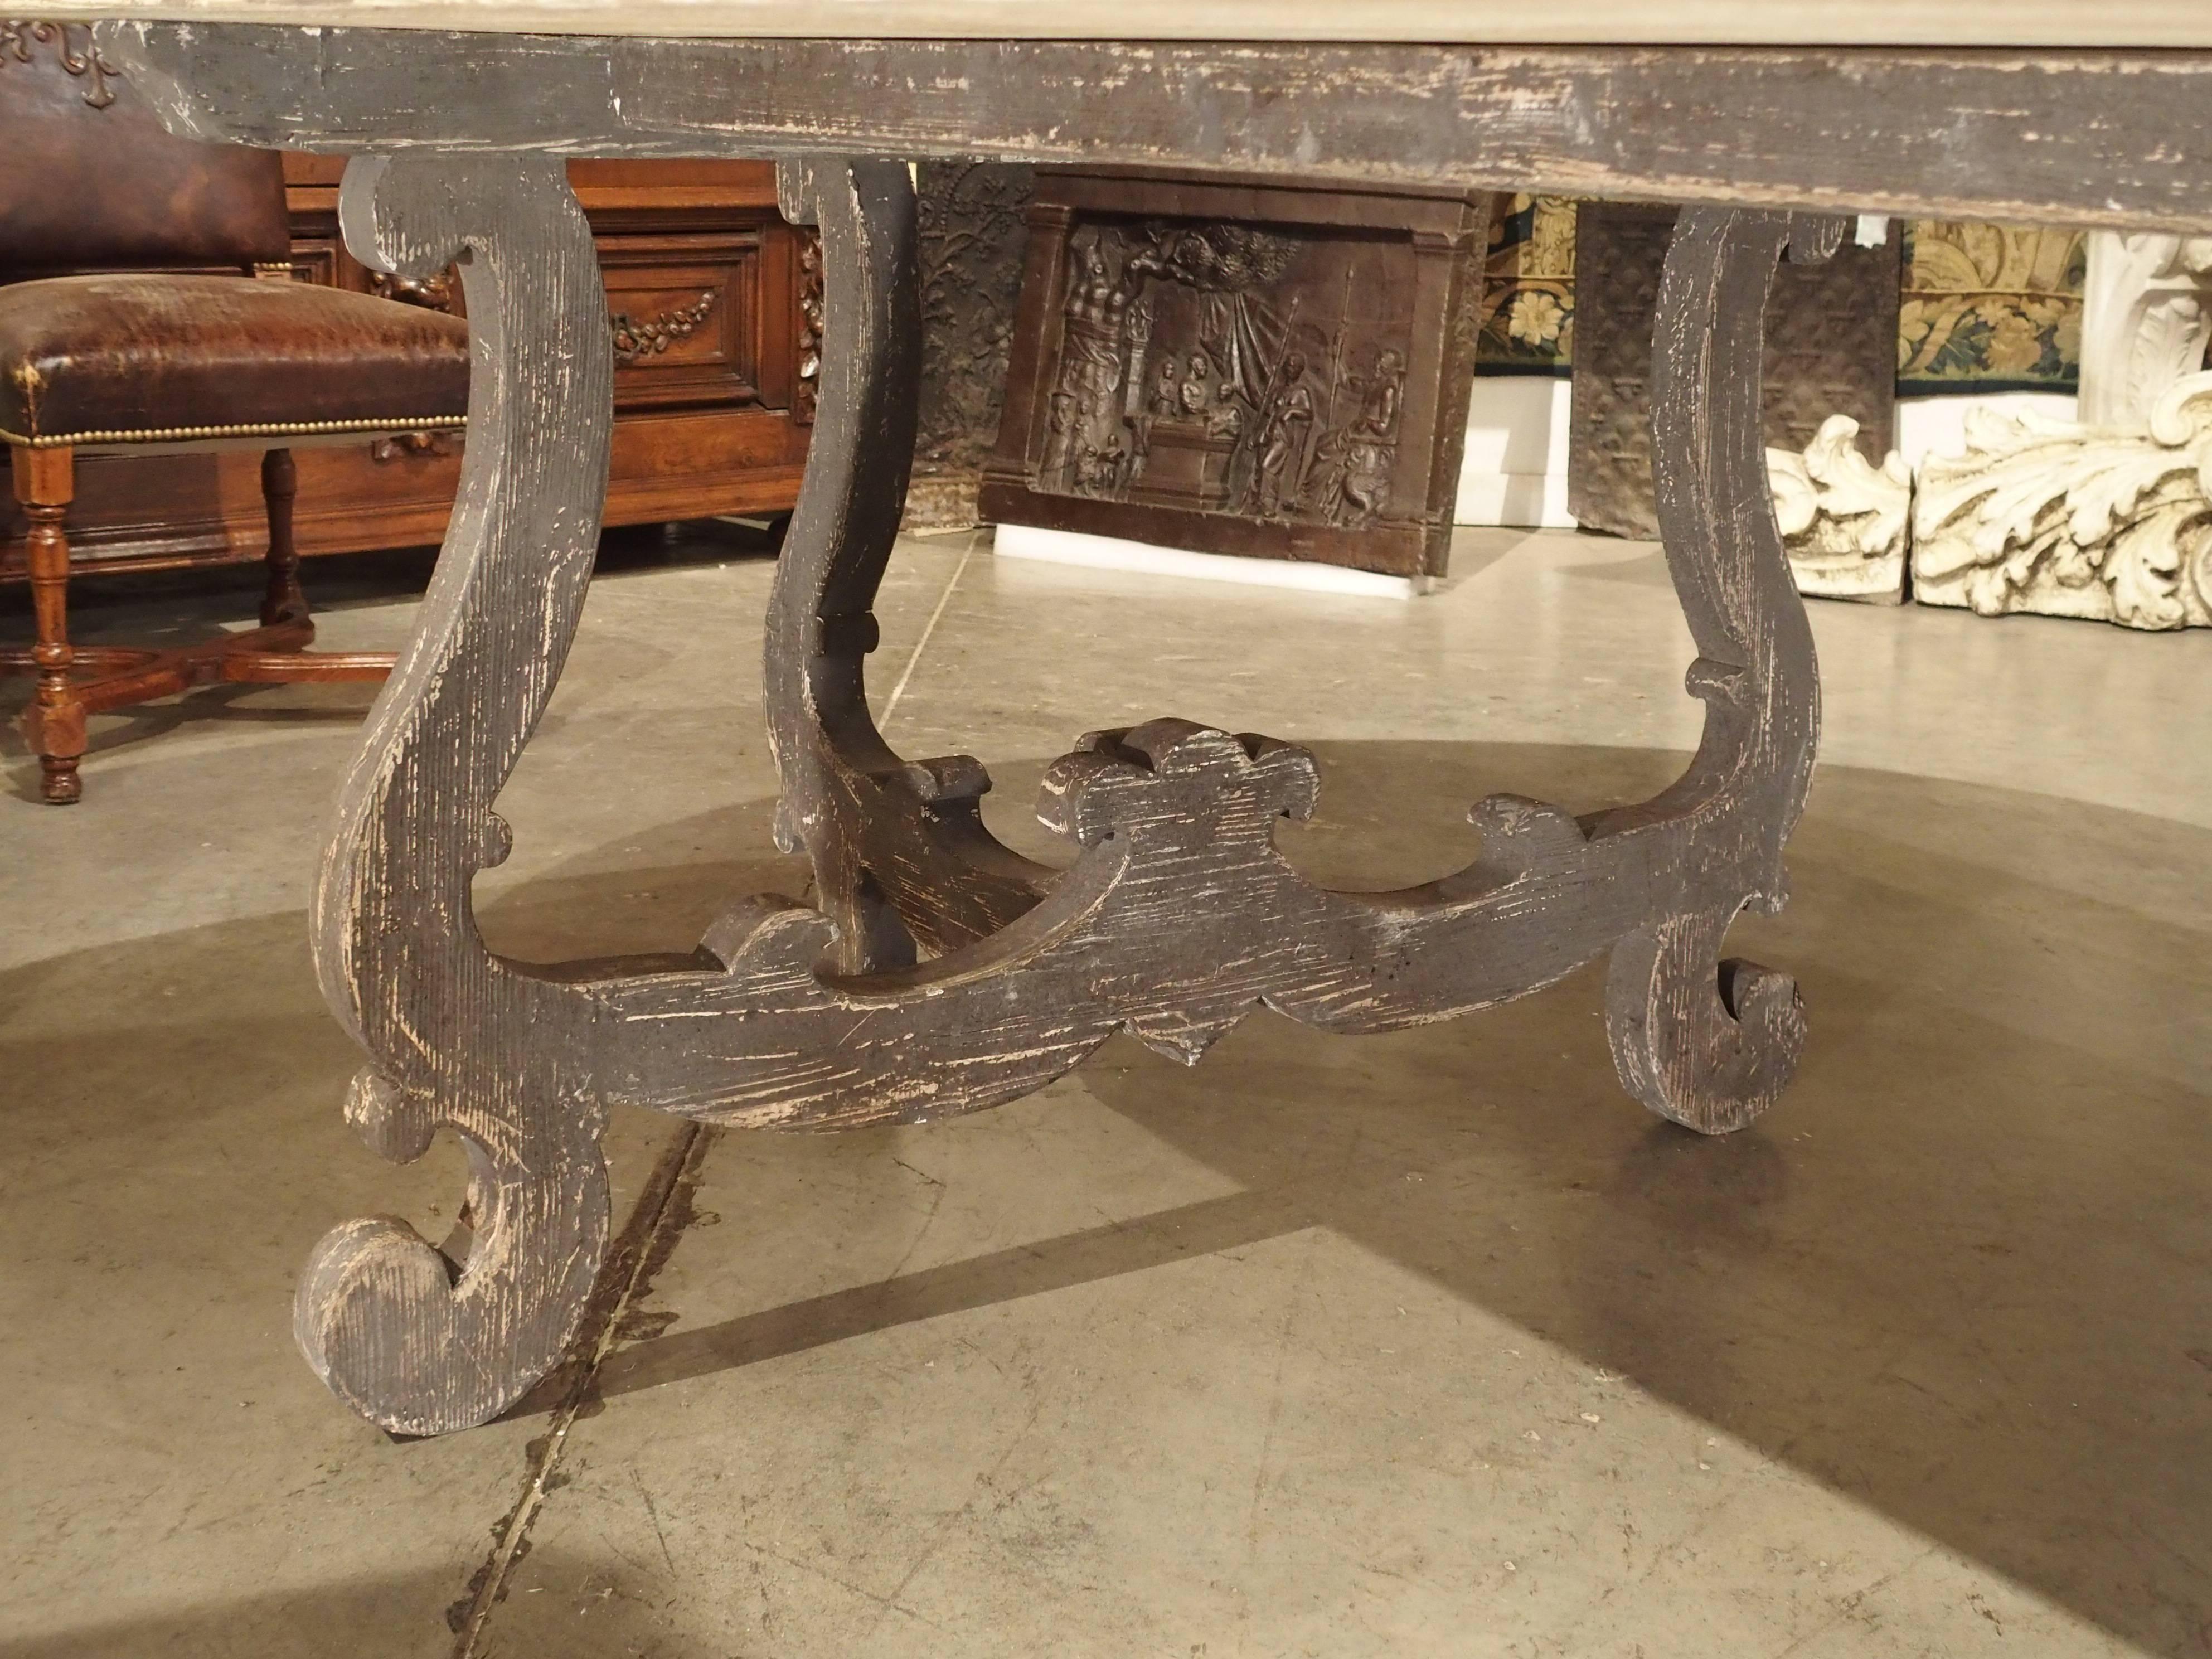 Table comes apart and two ends can be used as console tables.

This parcel paint Italian dining table has a large width of nearly 5 feet. The carved pine legs ends are lyre shaped and parcel painted a nice grey color. One of the most interesting